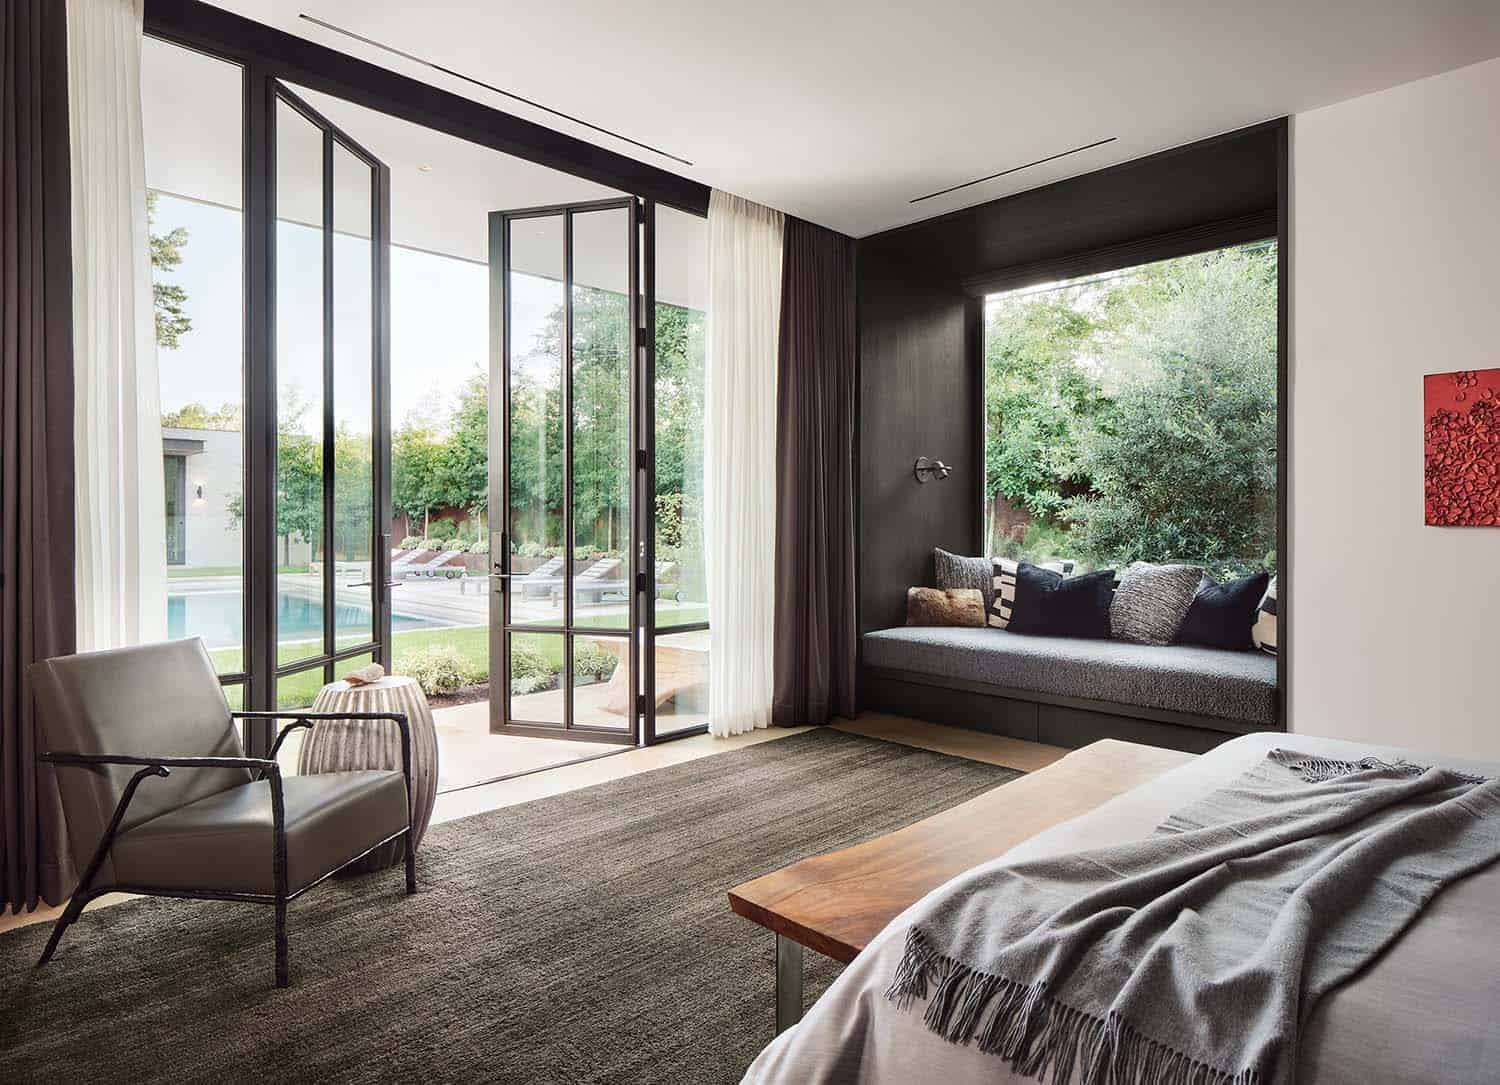 modern bedroom with a window seating and folding glass doors leading out to the backyard patio